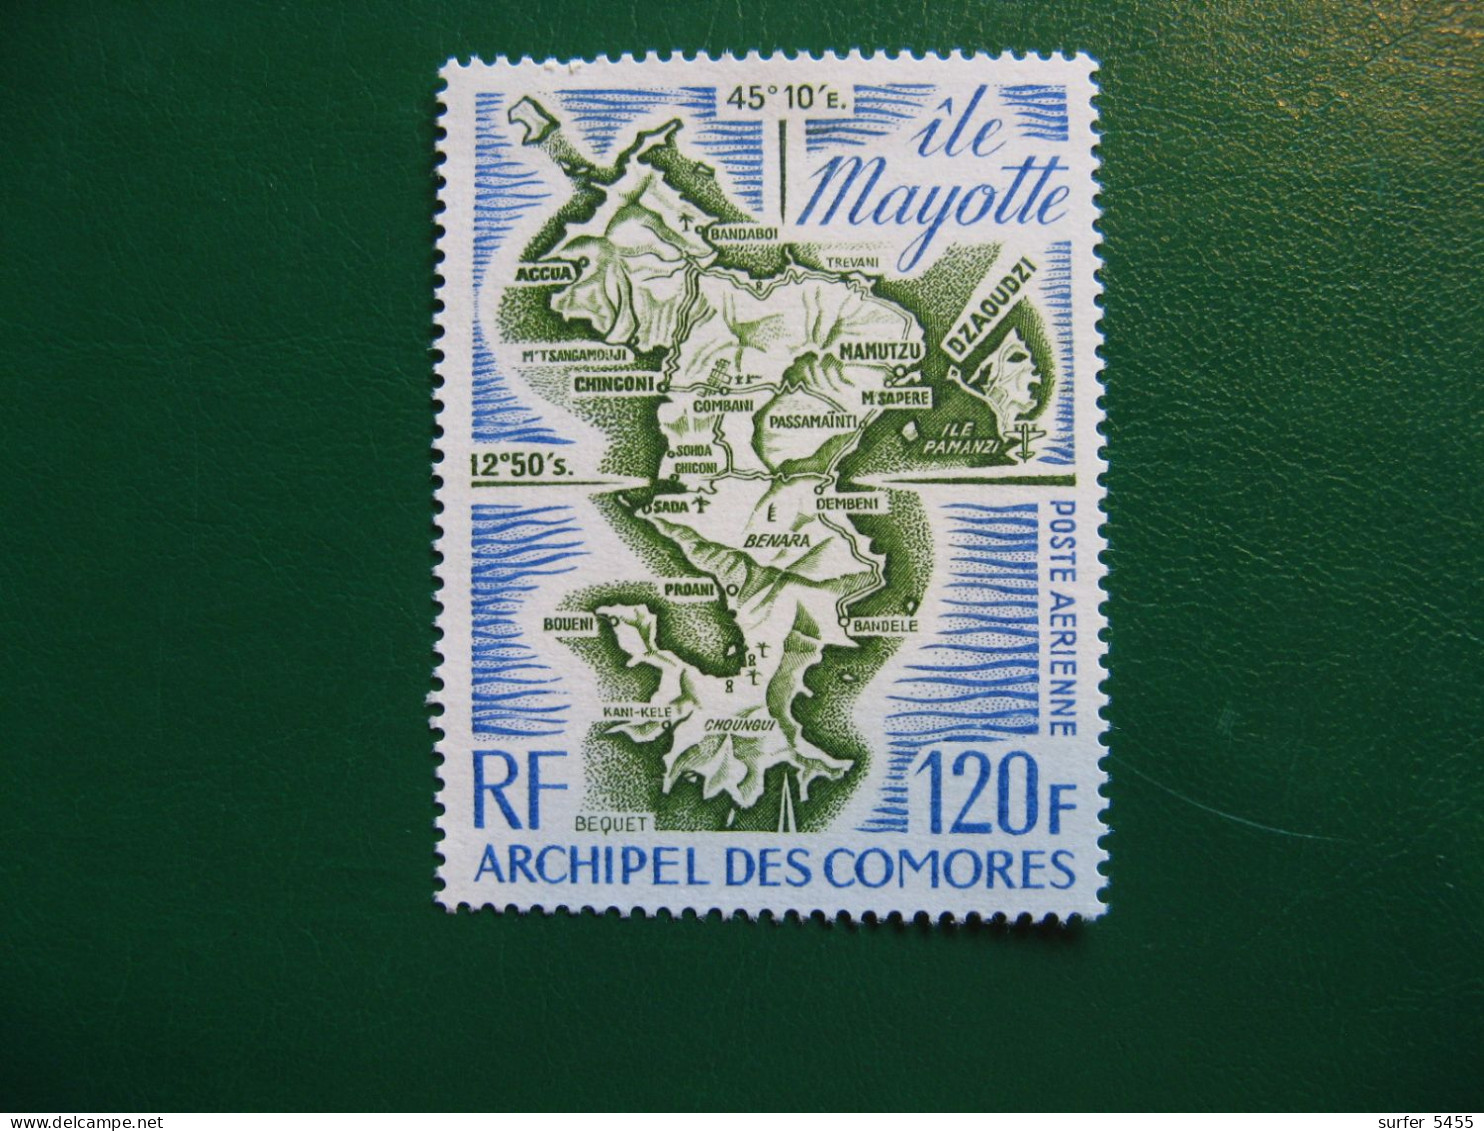 COMORES YVERT POSTE AERIENNE N° 61 TIMBRE NEUF** LUXE - MNH - COTE 12,00 EUROS - Unused Stamps